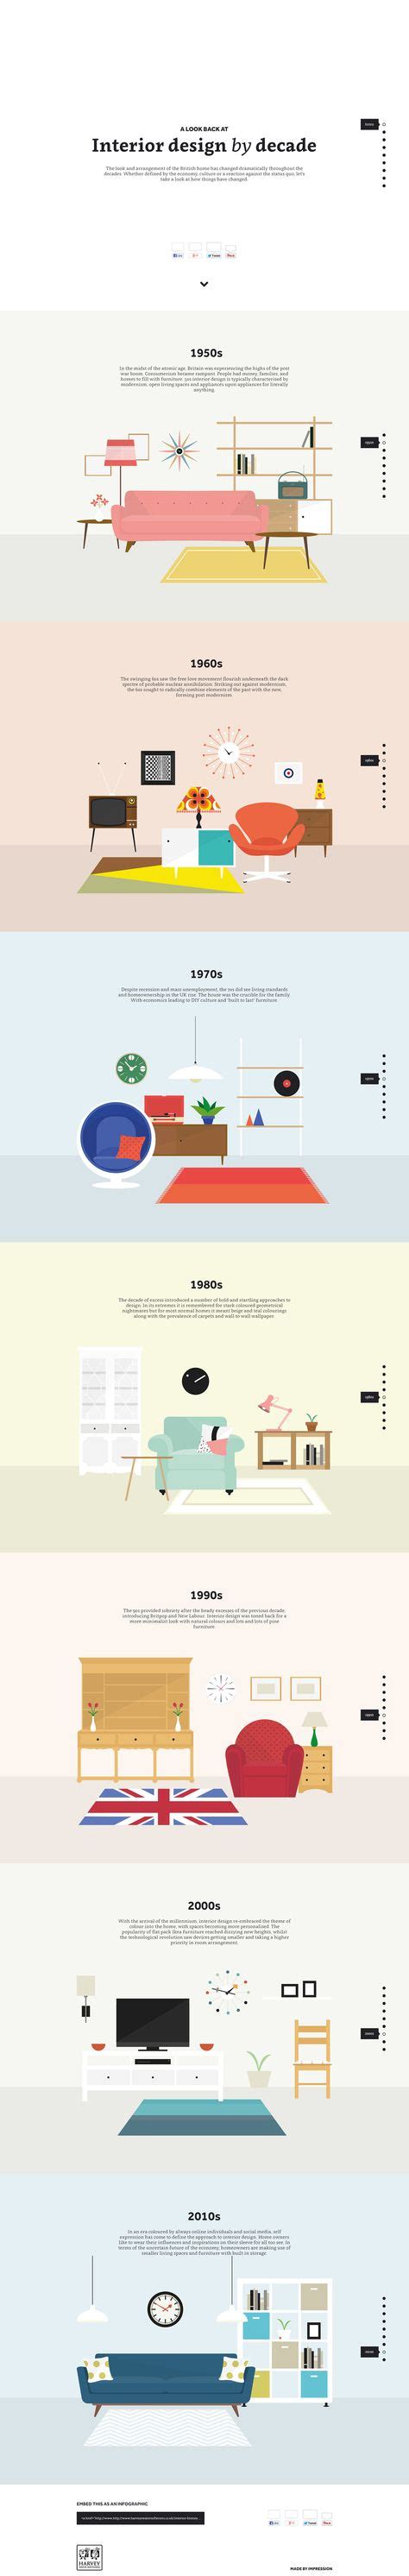 Lovely Informational One Pager Showcasing How Interior Design Has